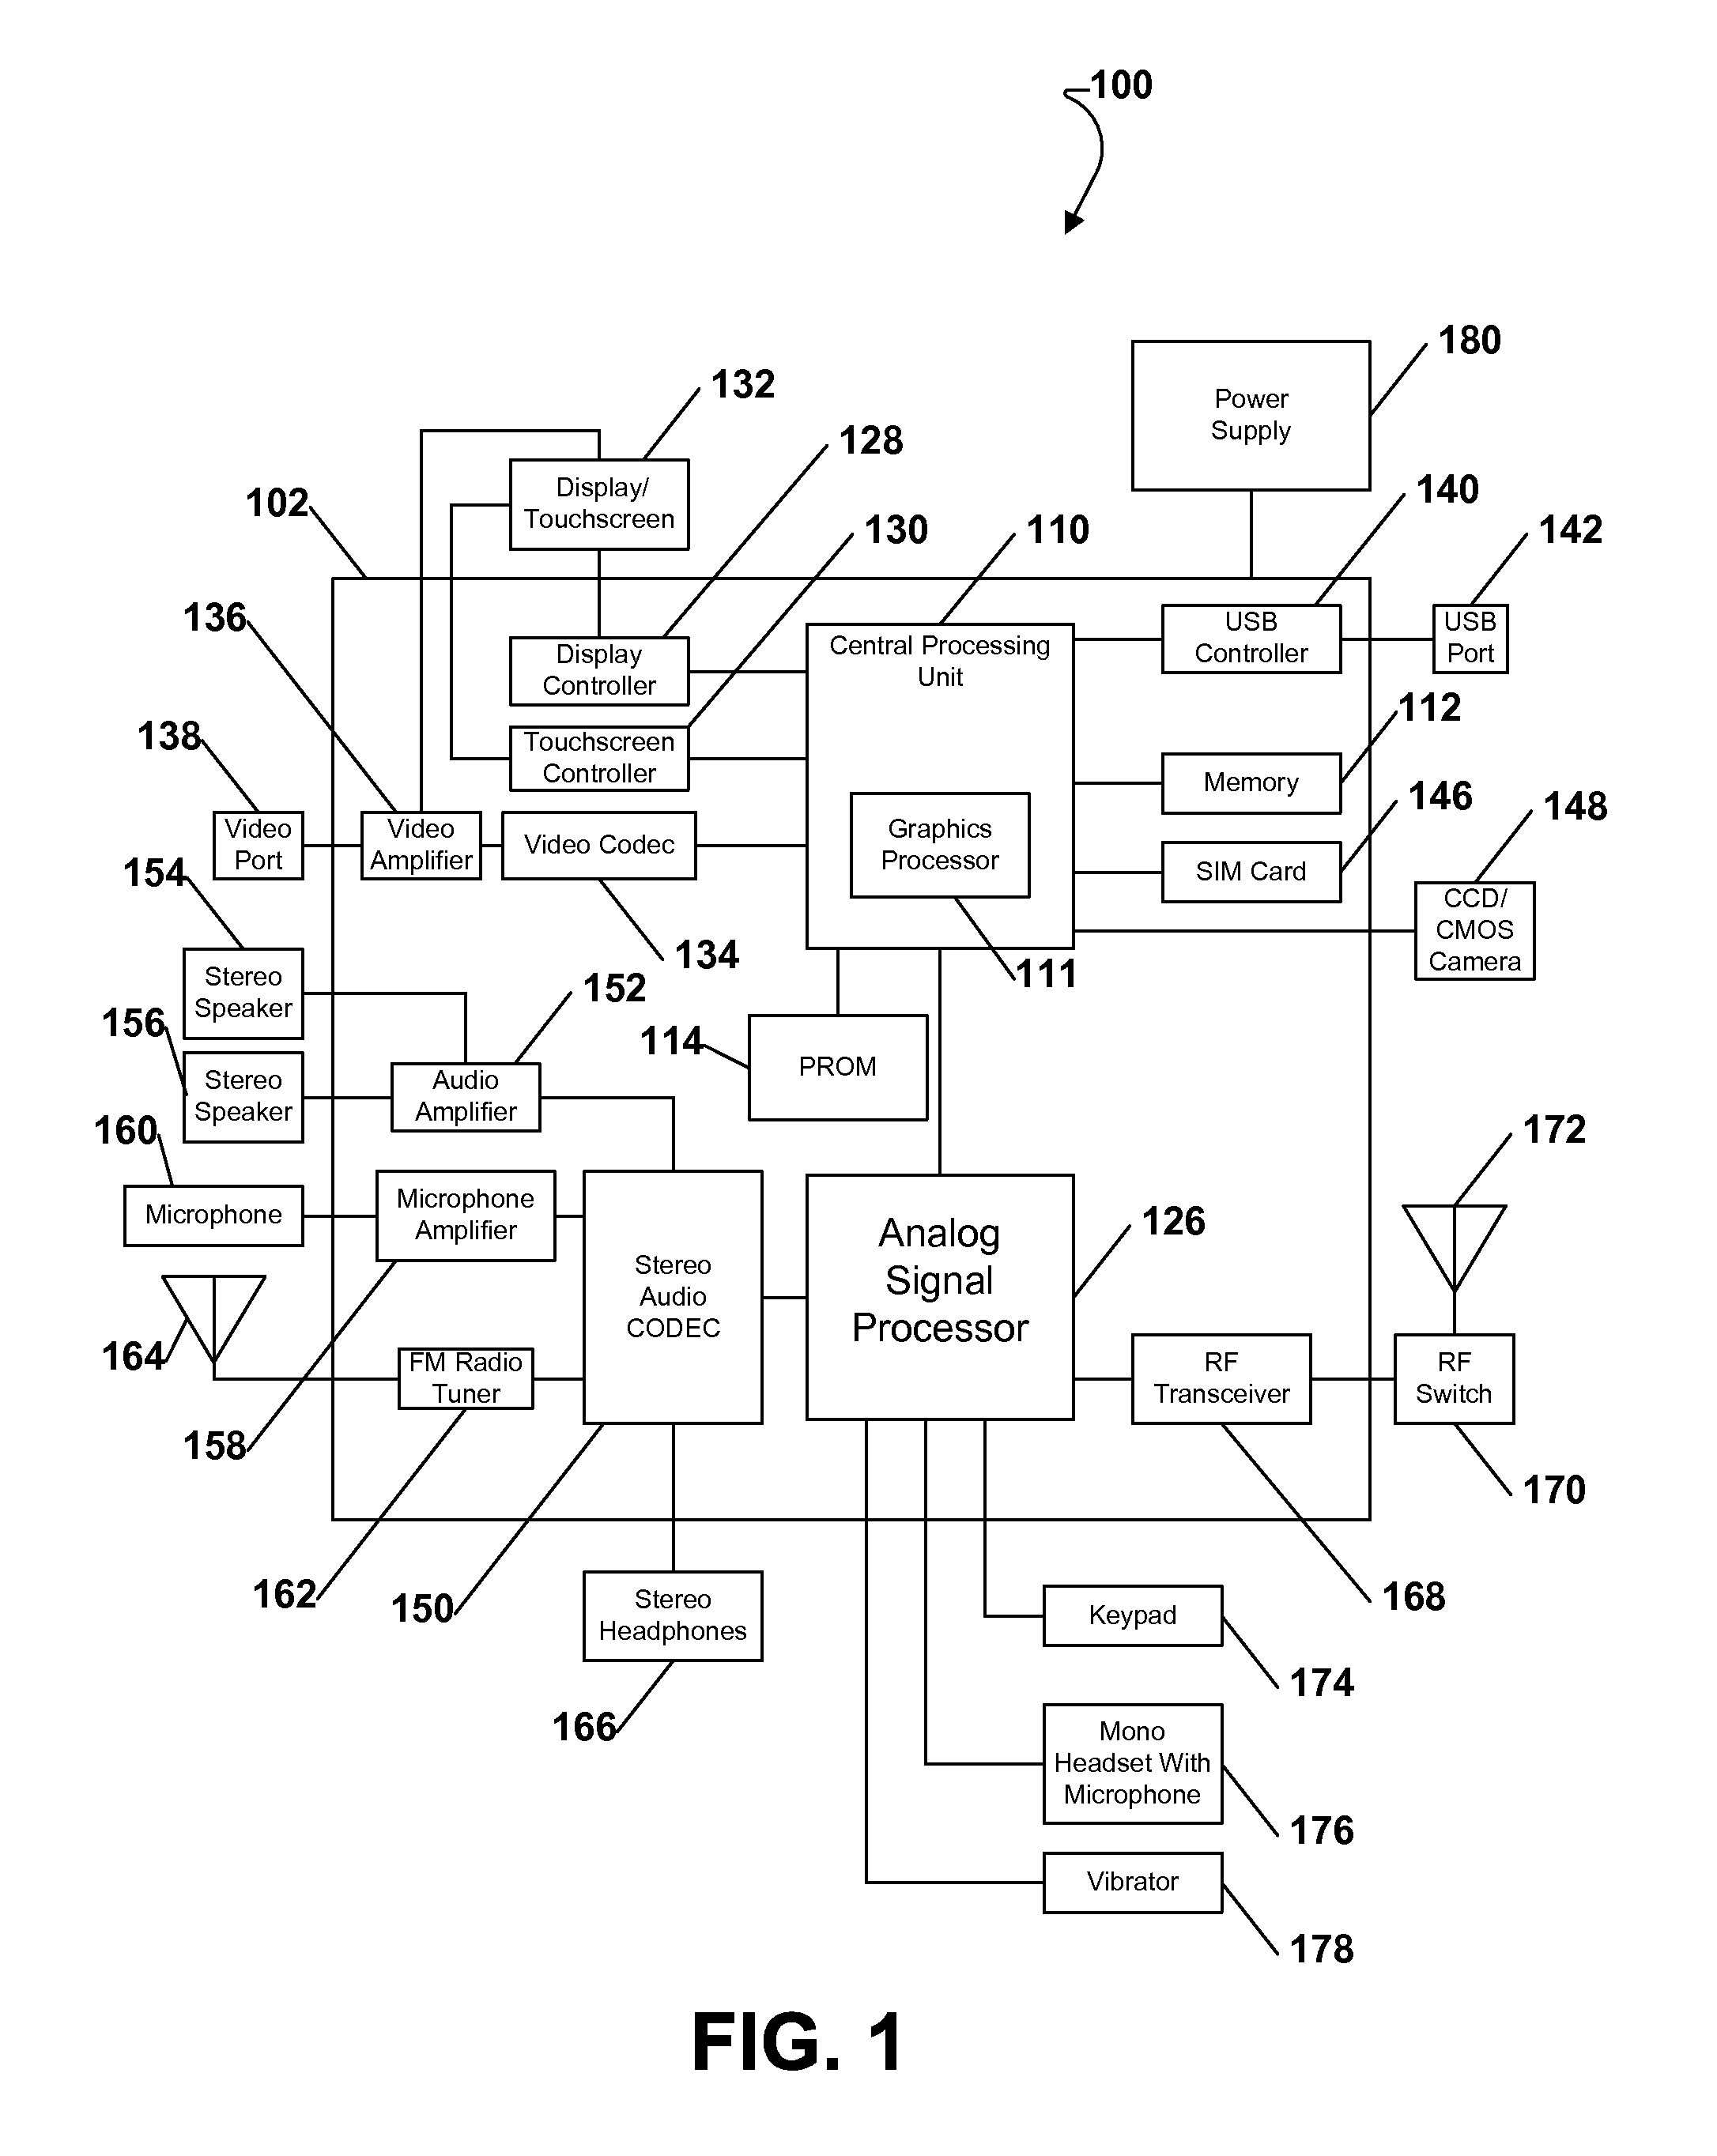 Method and a Portable Computing Device (PCD) For Exposing a Peripheral Component Interface Express (PCIE) Coupled Device to an Operating System Operable on the PCD